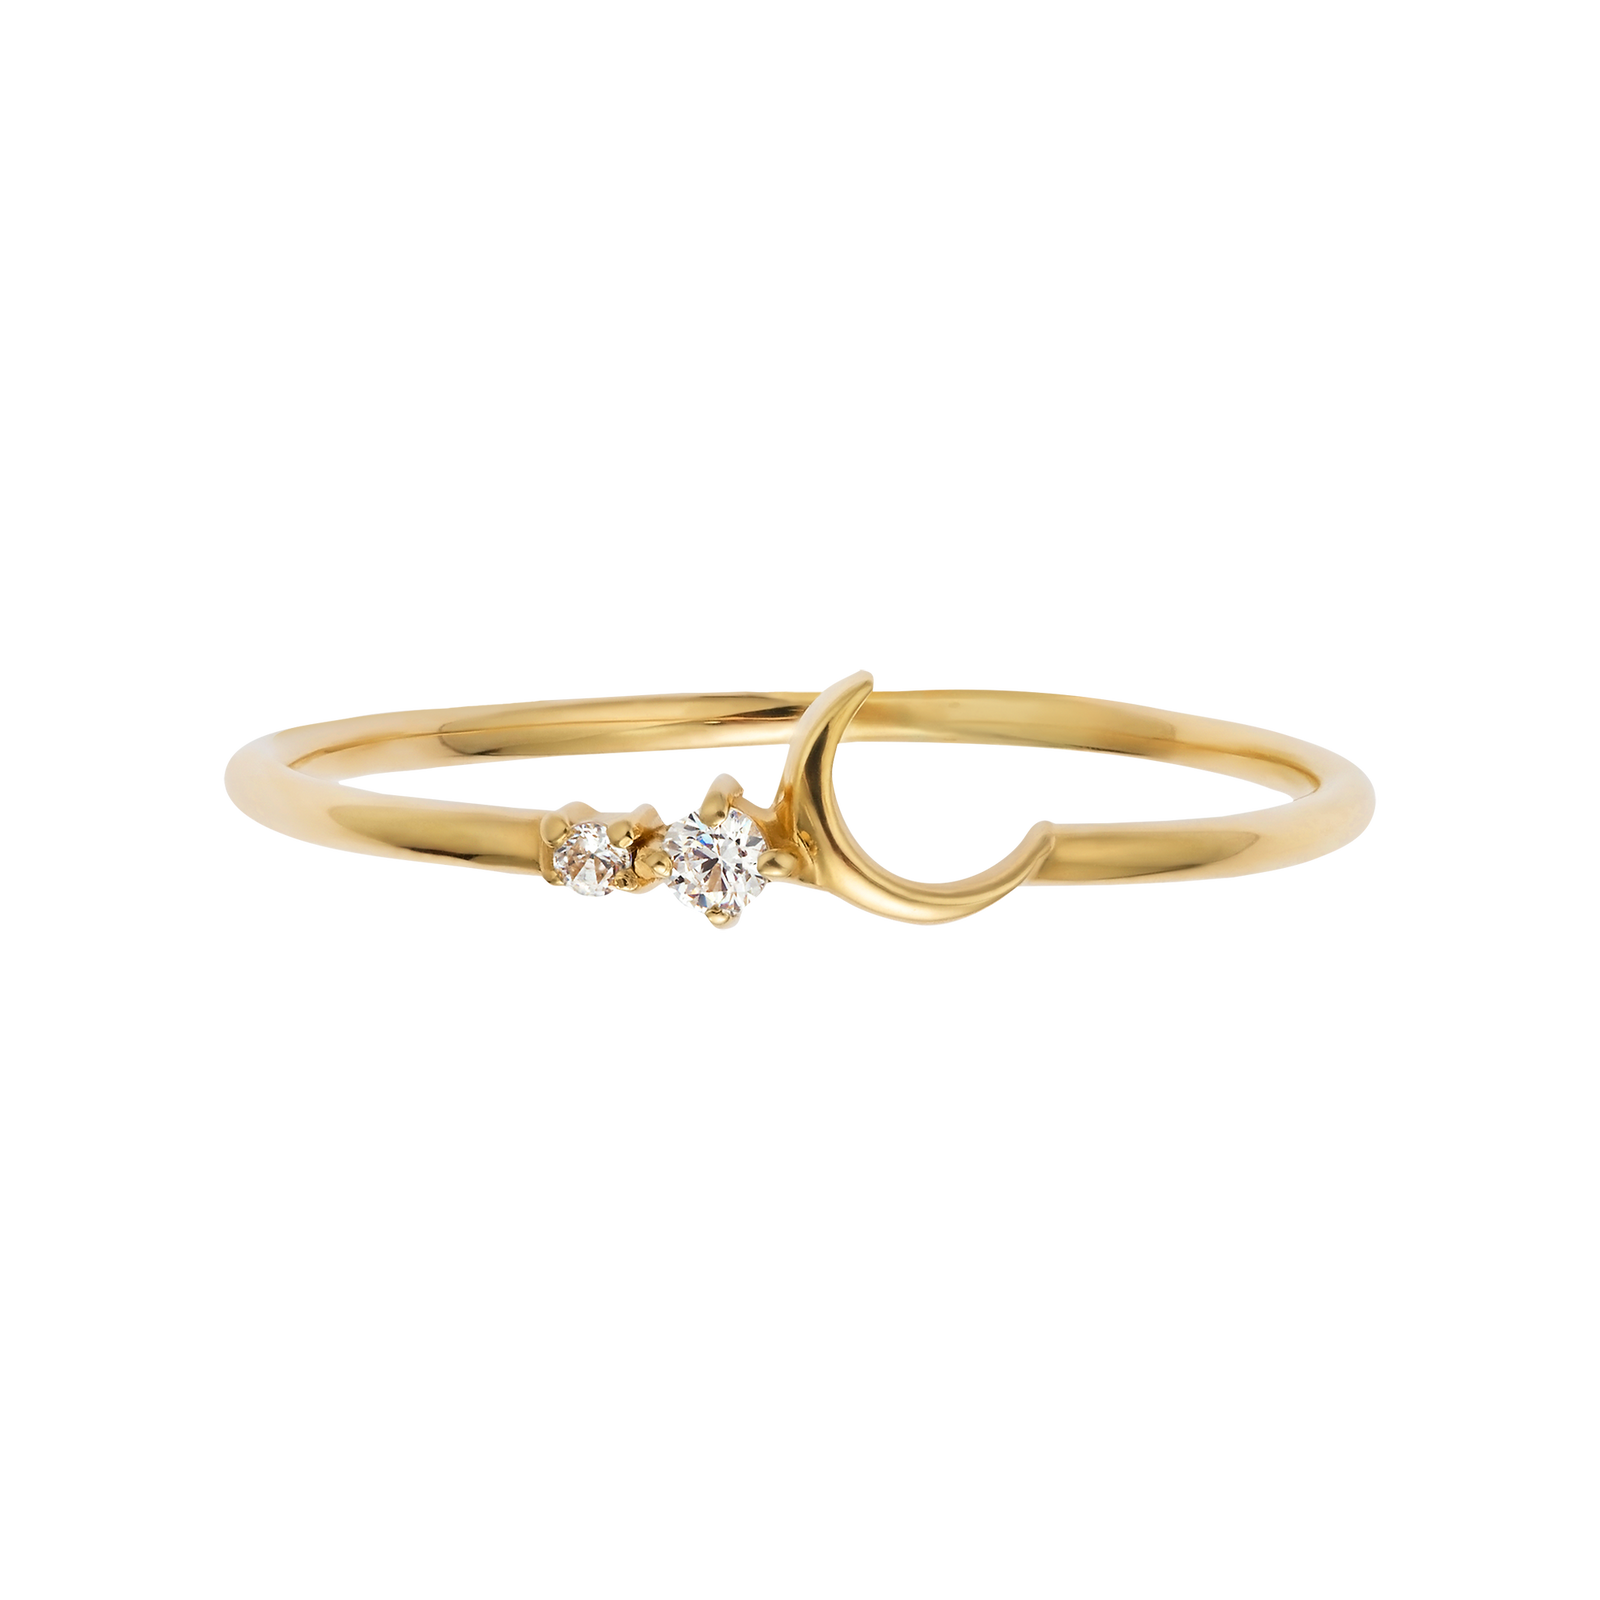 Gold Diamond Fly Me To the Moon Ring